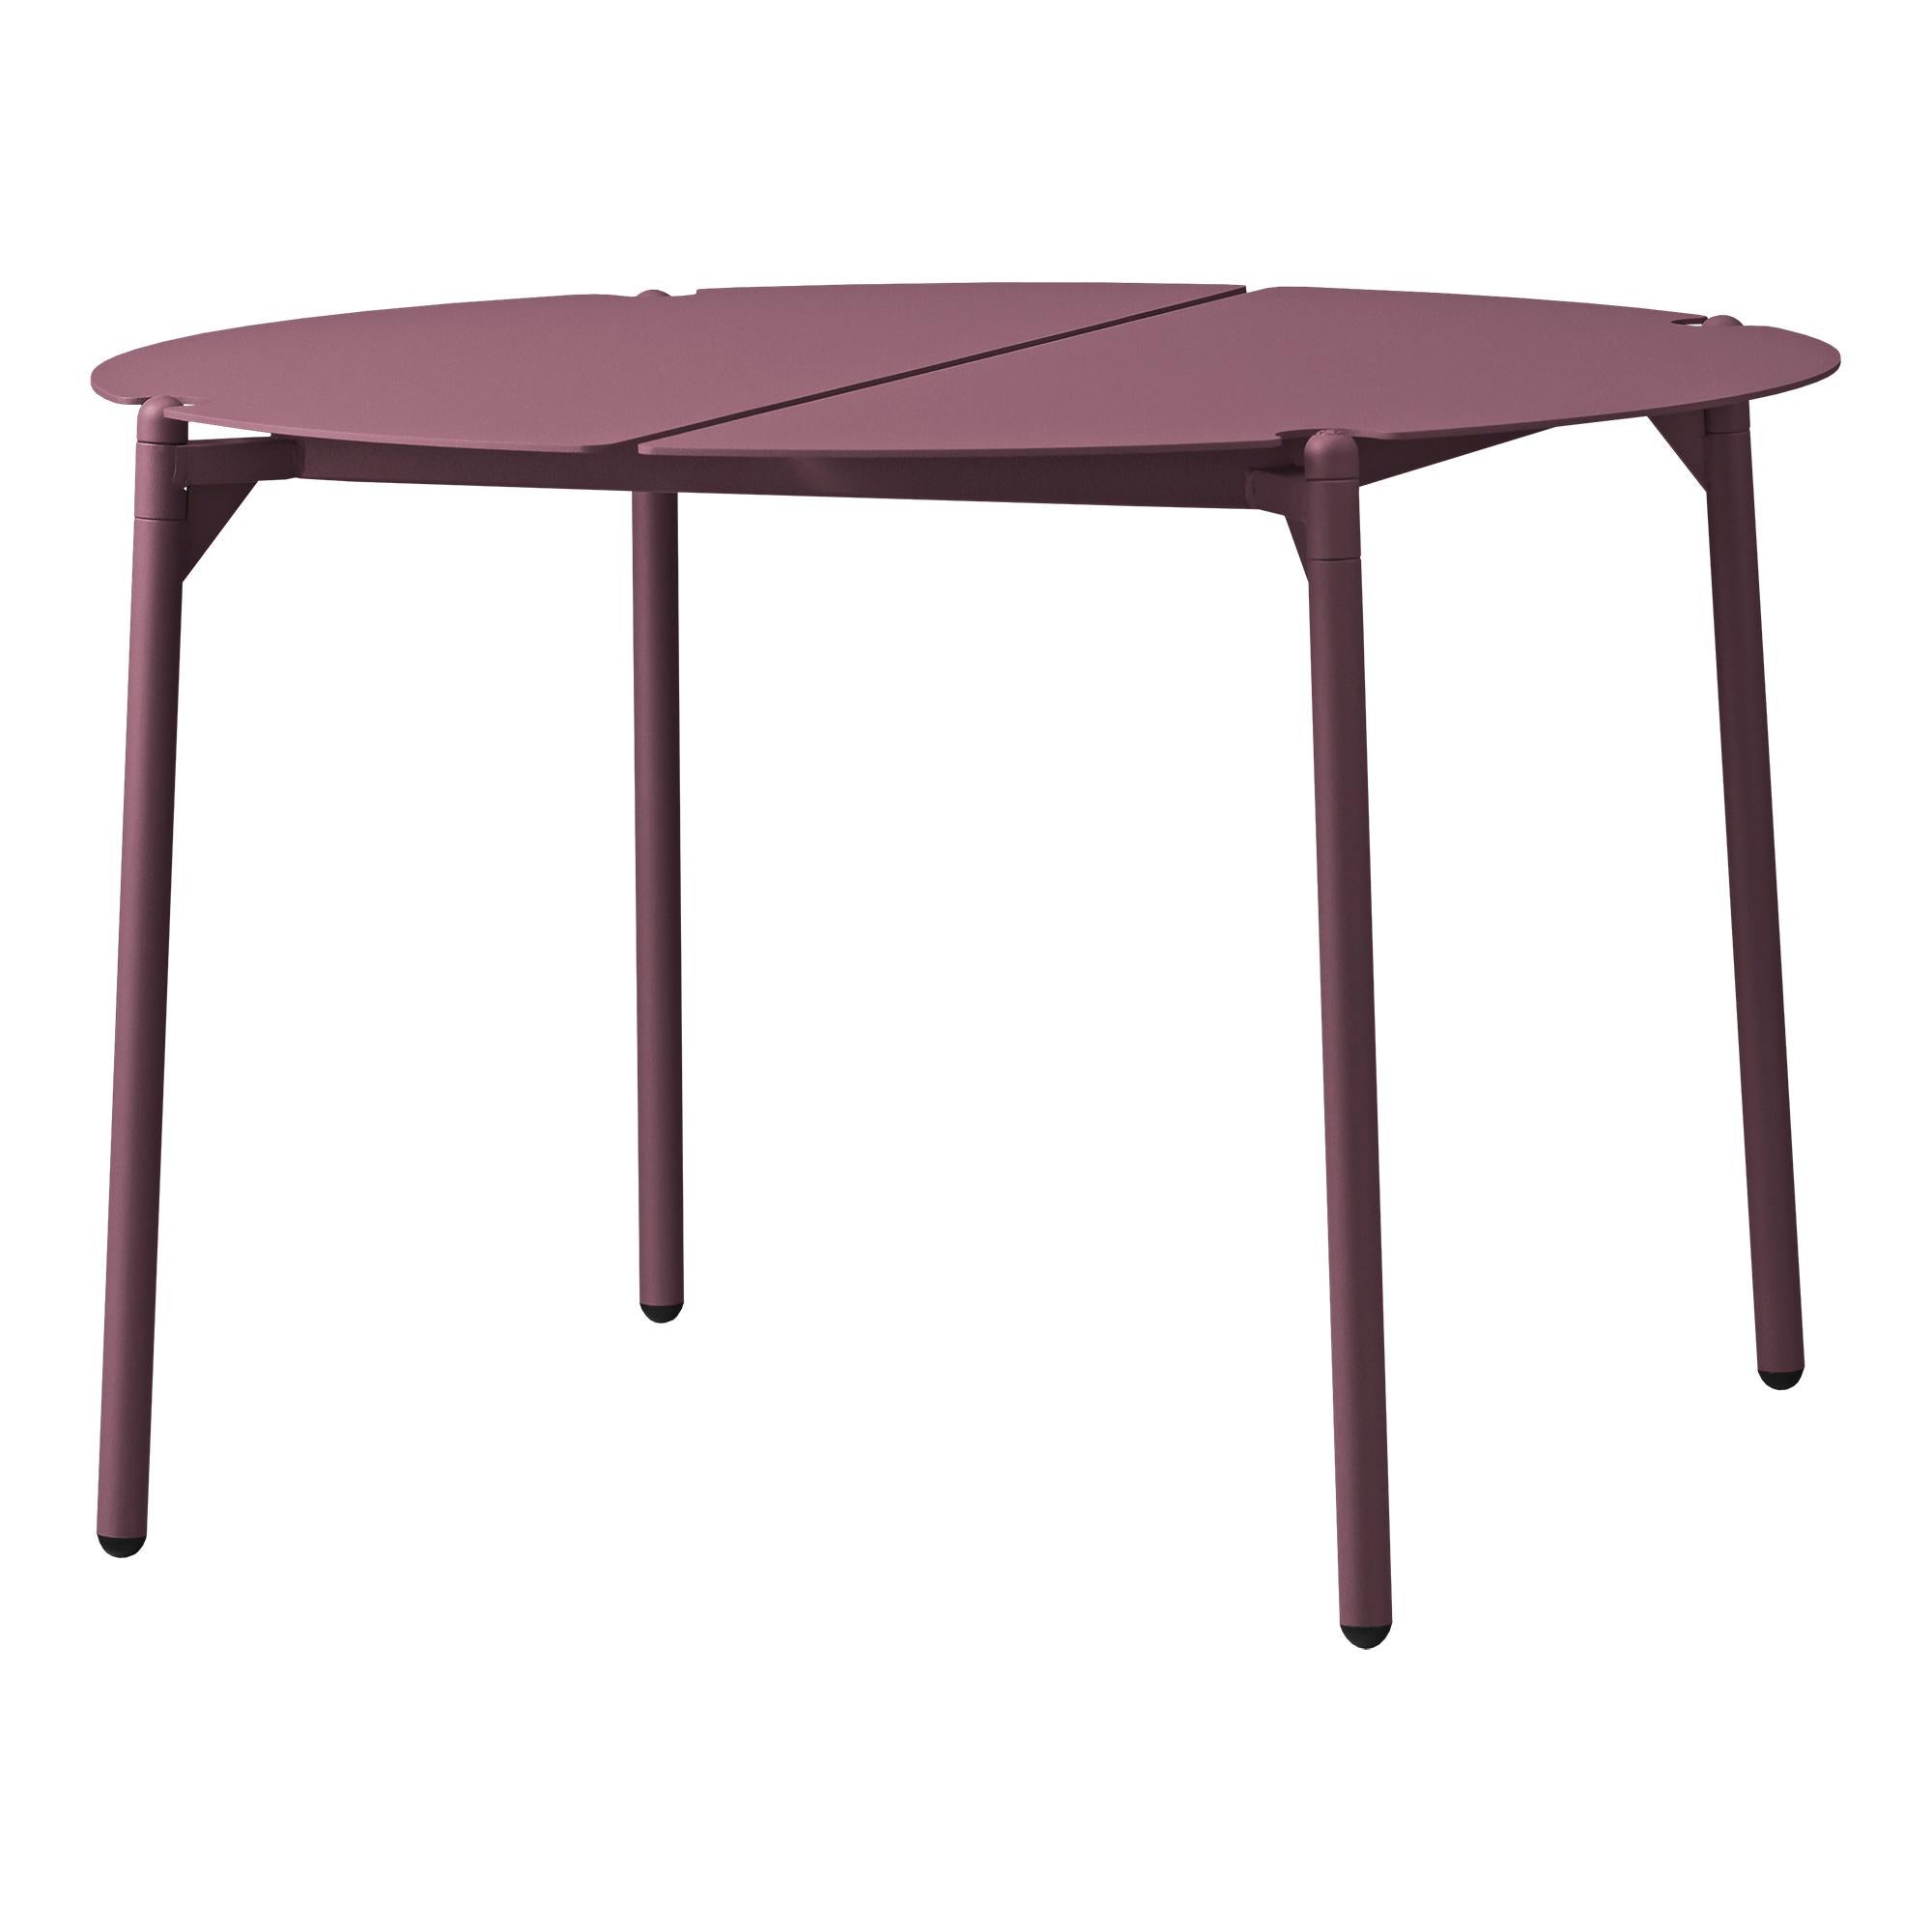 Large Bordeaux Minimalist lounge table
Dimensions: Diameter 70 x Height 45 cm 
Materials: Steel w. Matte powder coating & aluminum w. Matte powder coating.
Available in colors: Taupe, bordeaux, forest, ginger bread, black and, black and